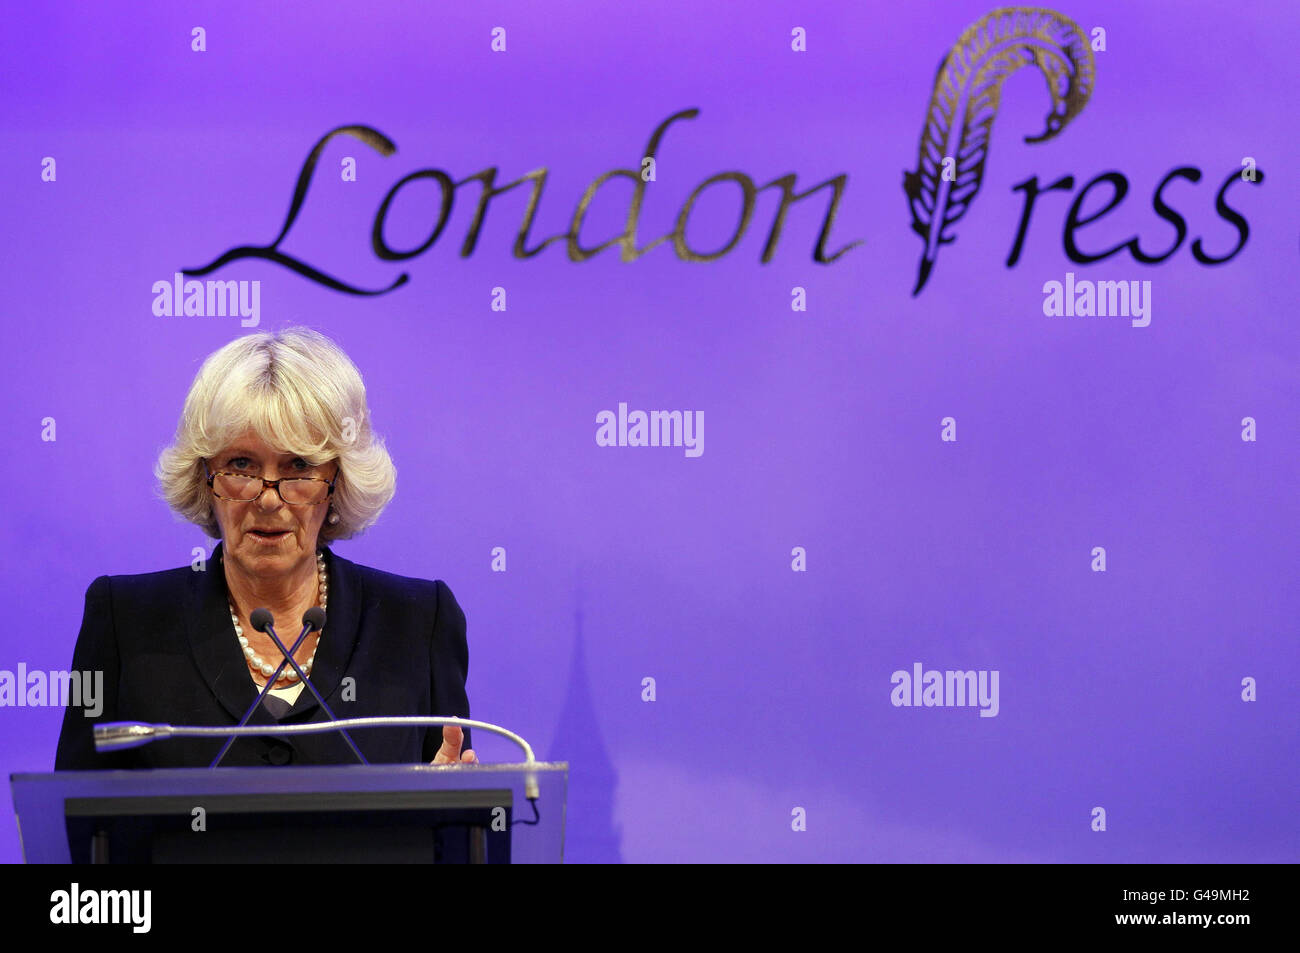 The Duchess of Cornwall delivers a speech at the London Press Club Awards in London. Stock Photo